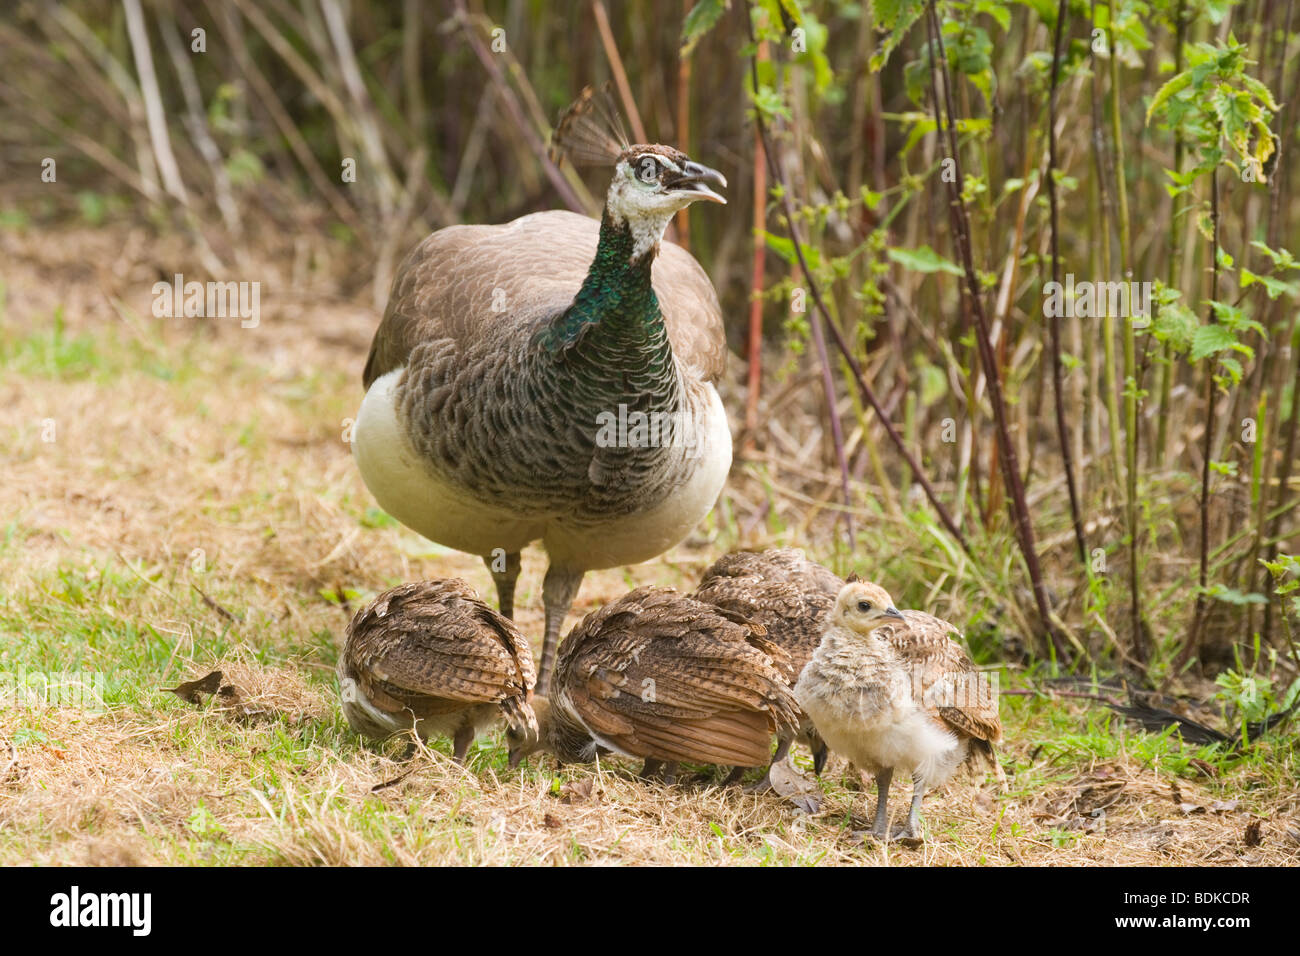 Common, Indian or Blue Peafowl (Pavo cristata). Peahen, or female, and feeding chicks. Stock Photo